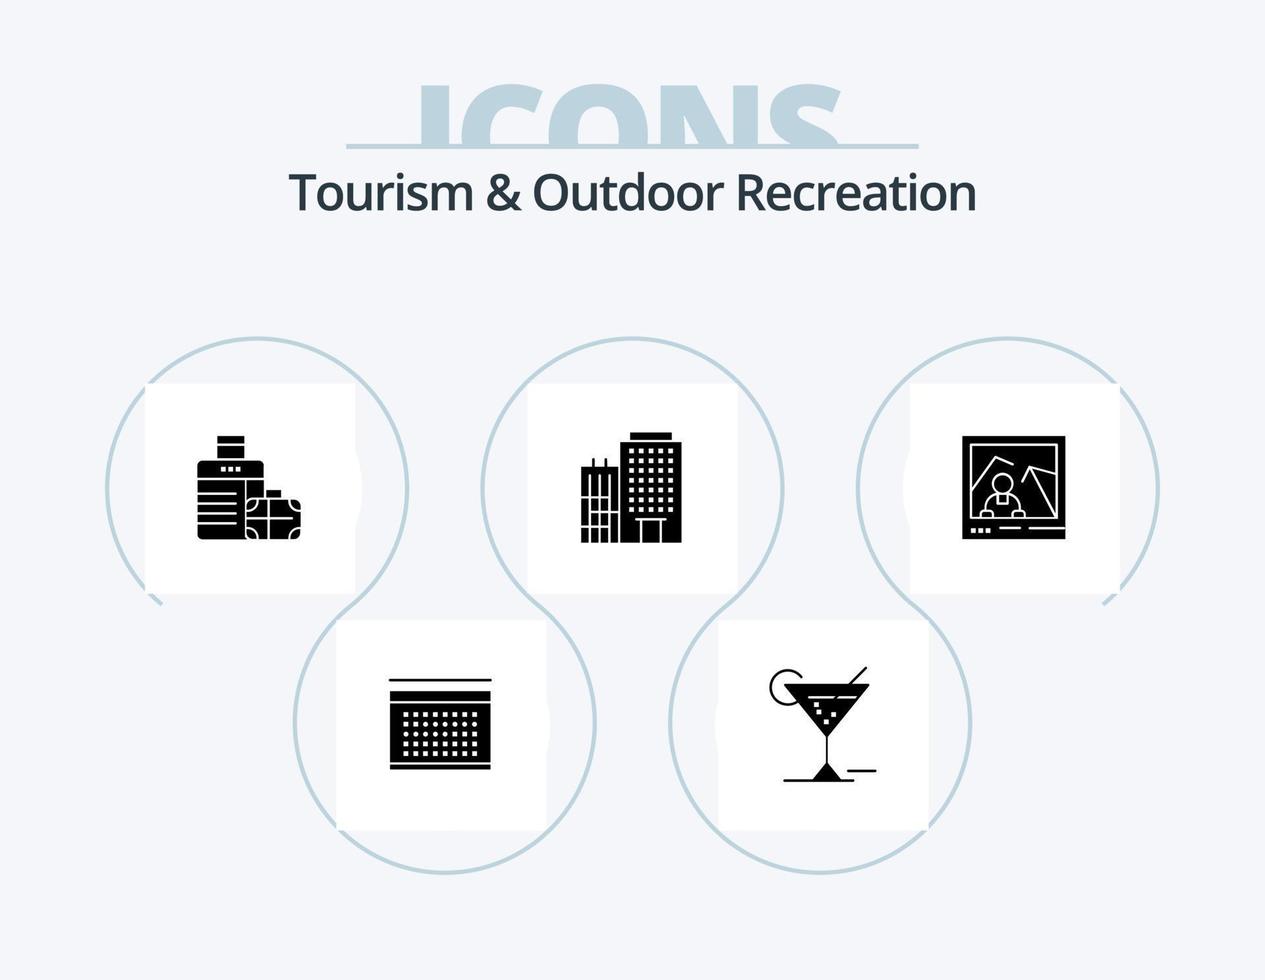 Tourism And Outdoor Recreation Glyph Icon Pack 5 Icon Design. image. service. luggage. home. hotel vector